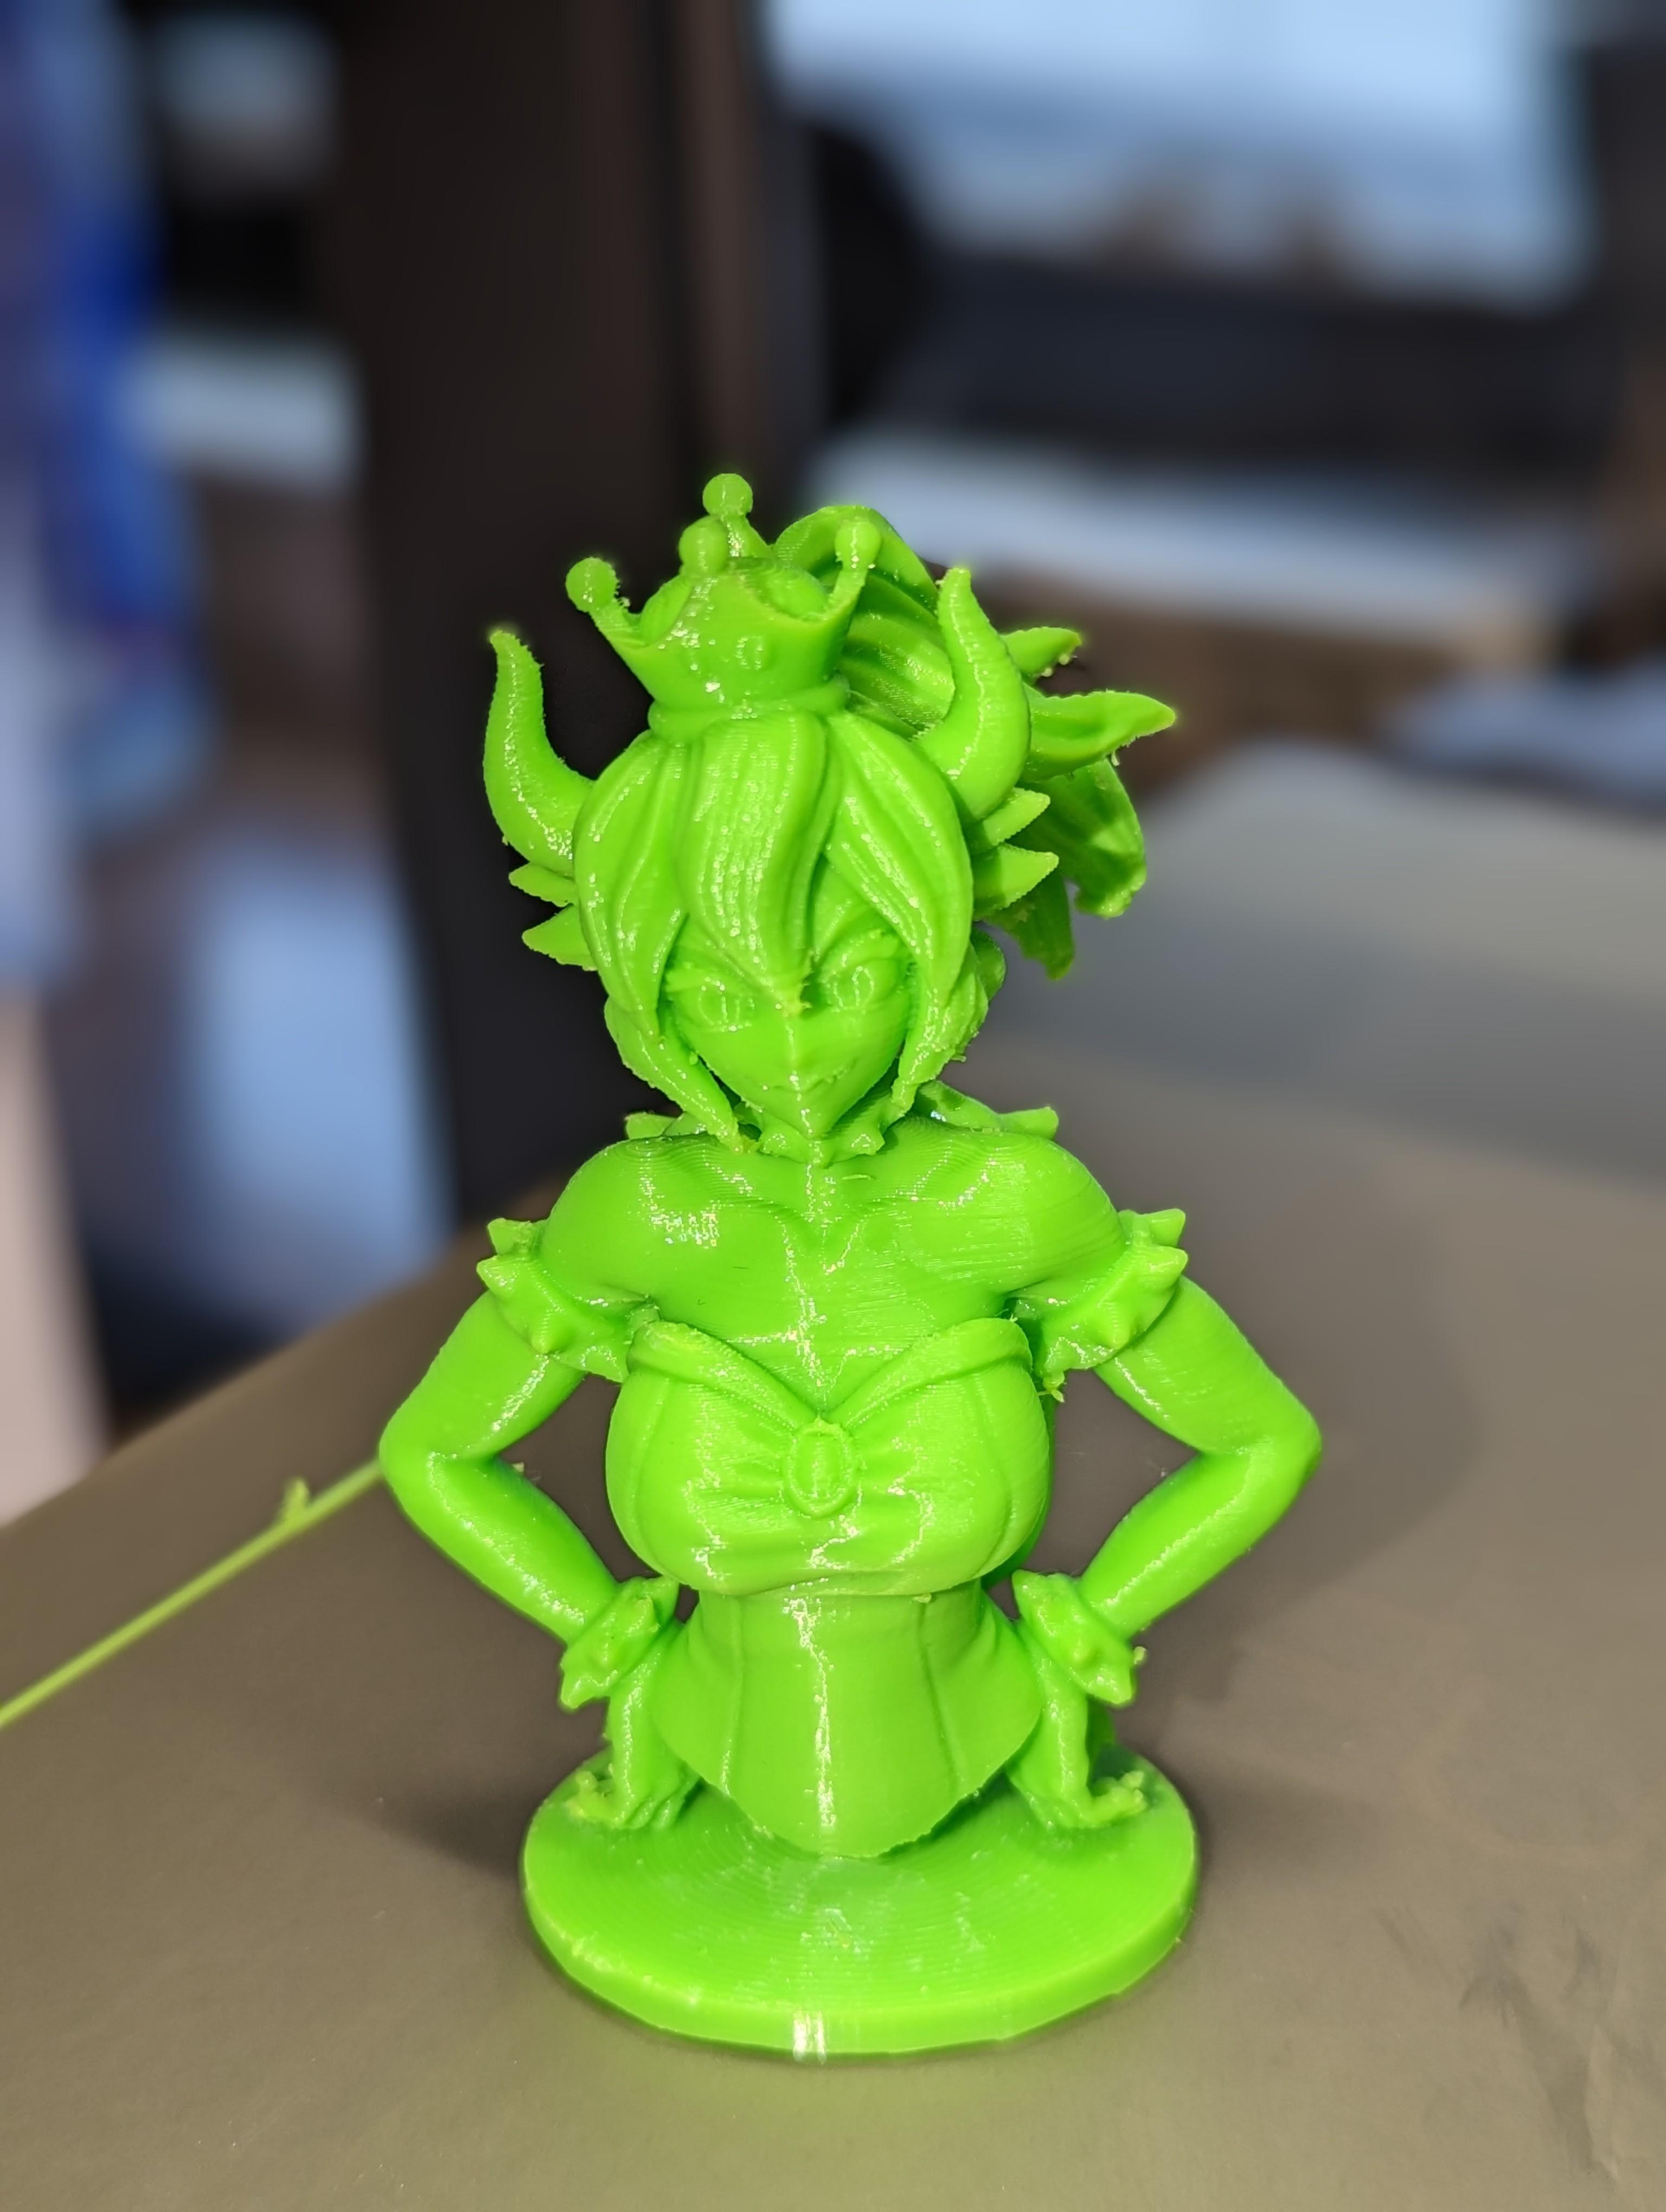 Bowsette - Super Mario Bro's - Fan Art - Probably meant for a resin printer, but hey, not bad for an FDM! Needs a bit more post-processing but I'm happy with the results. Printed on an Ender 3 S1 Plus with tree supports, details could have been clearer but I printed this at 50% scale, only 85mm tall!  - 3d model